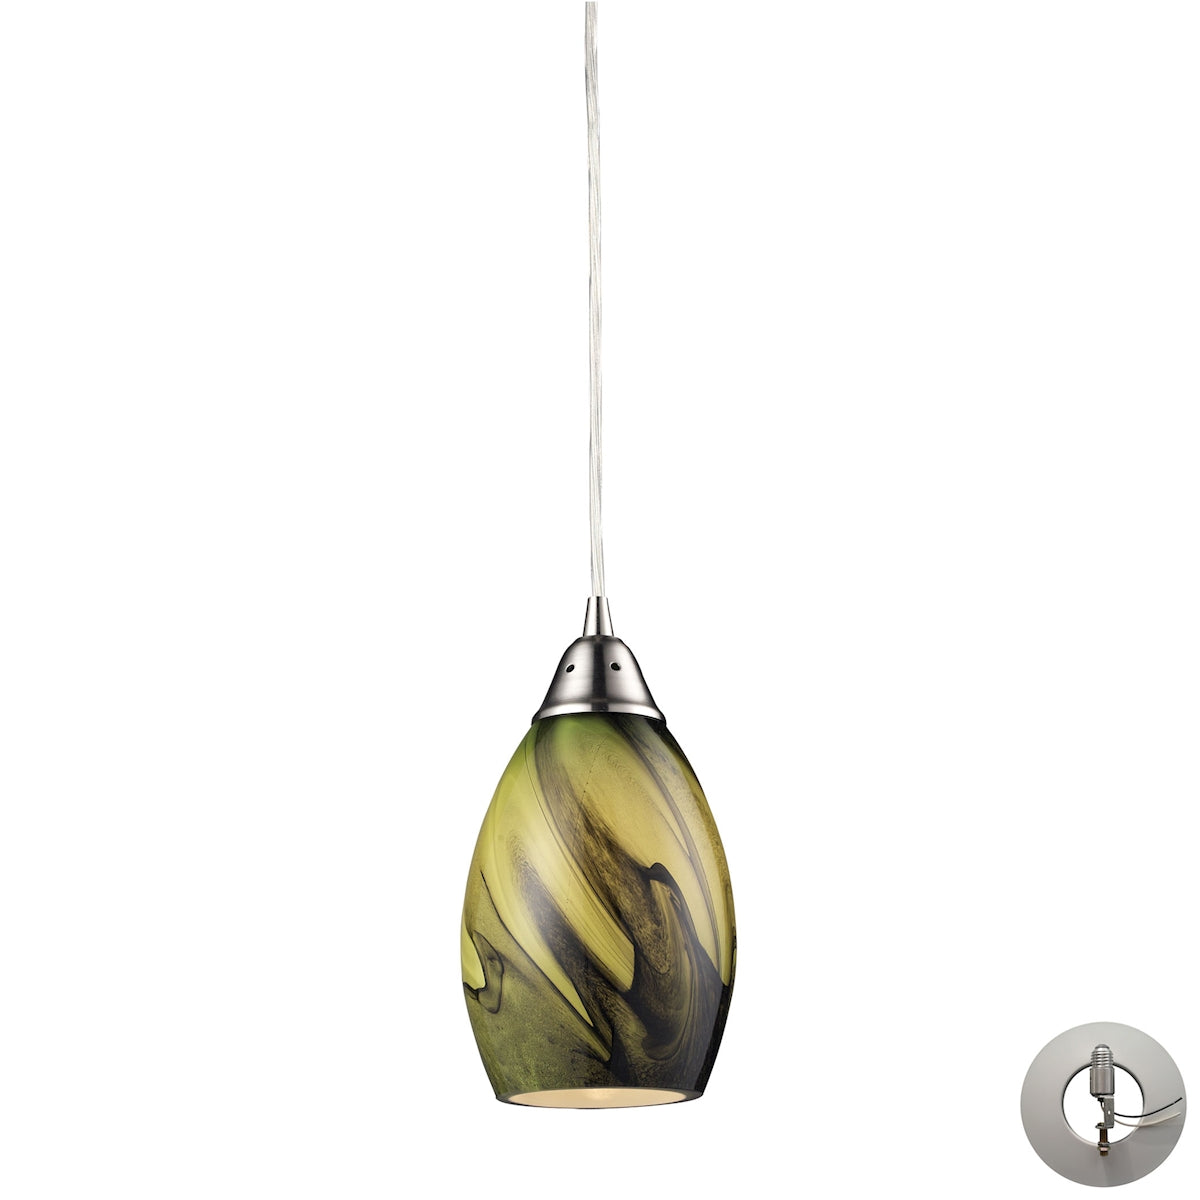 ELK Lighting 31133/1PLN-LA Formations 1-Light Mini Pendant in Satin Nickel with Planetary Glass - Includes Adapter Kit